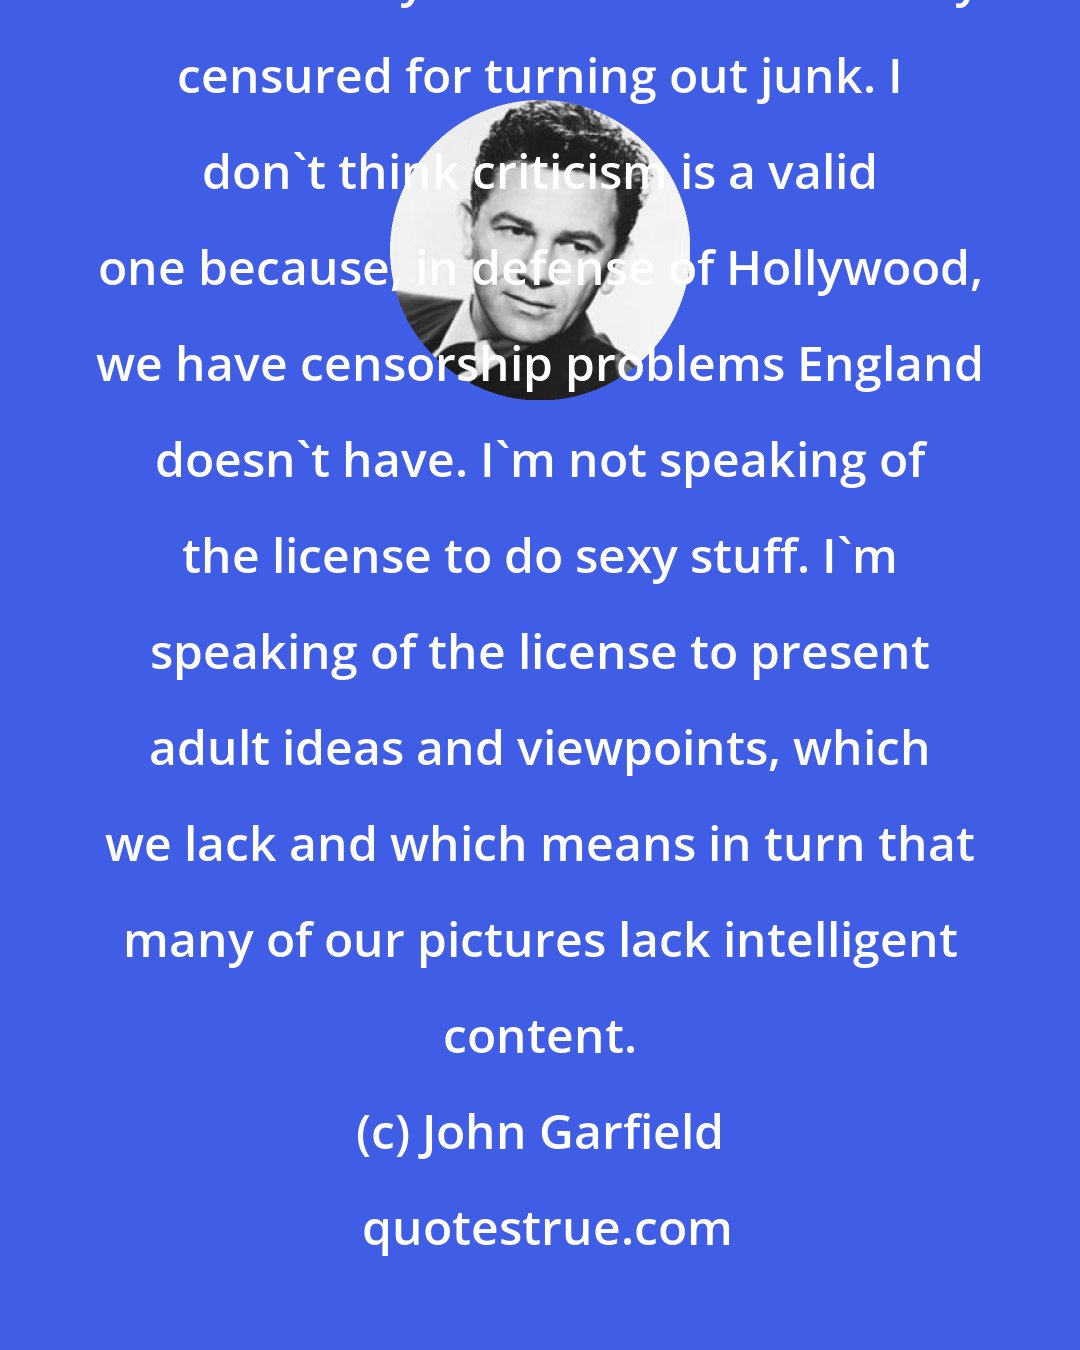 John Garfield: England has been praised for turning out intelligent, adult pictures whereas Hollywood has been severely censured for turning out junk. I don't think criticism is a valid one because, in defense of Hollywood, we have censorship problems England doesn't have. I'm not speaking of the license to do sexy stuff. I'm speaking of the license to present adult ideas and viewpoints, which we lack and which means in turn that many of our pictures lack intelligent content.